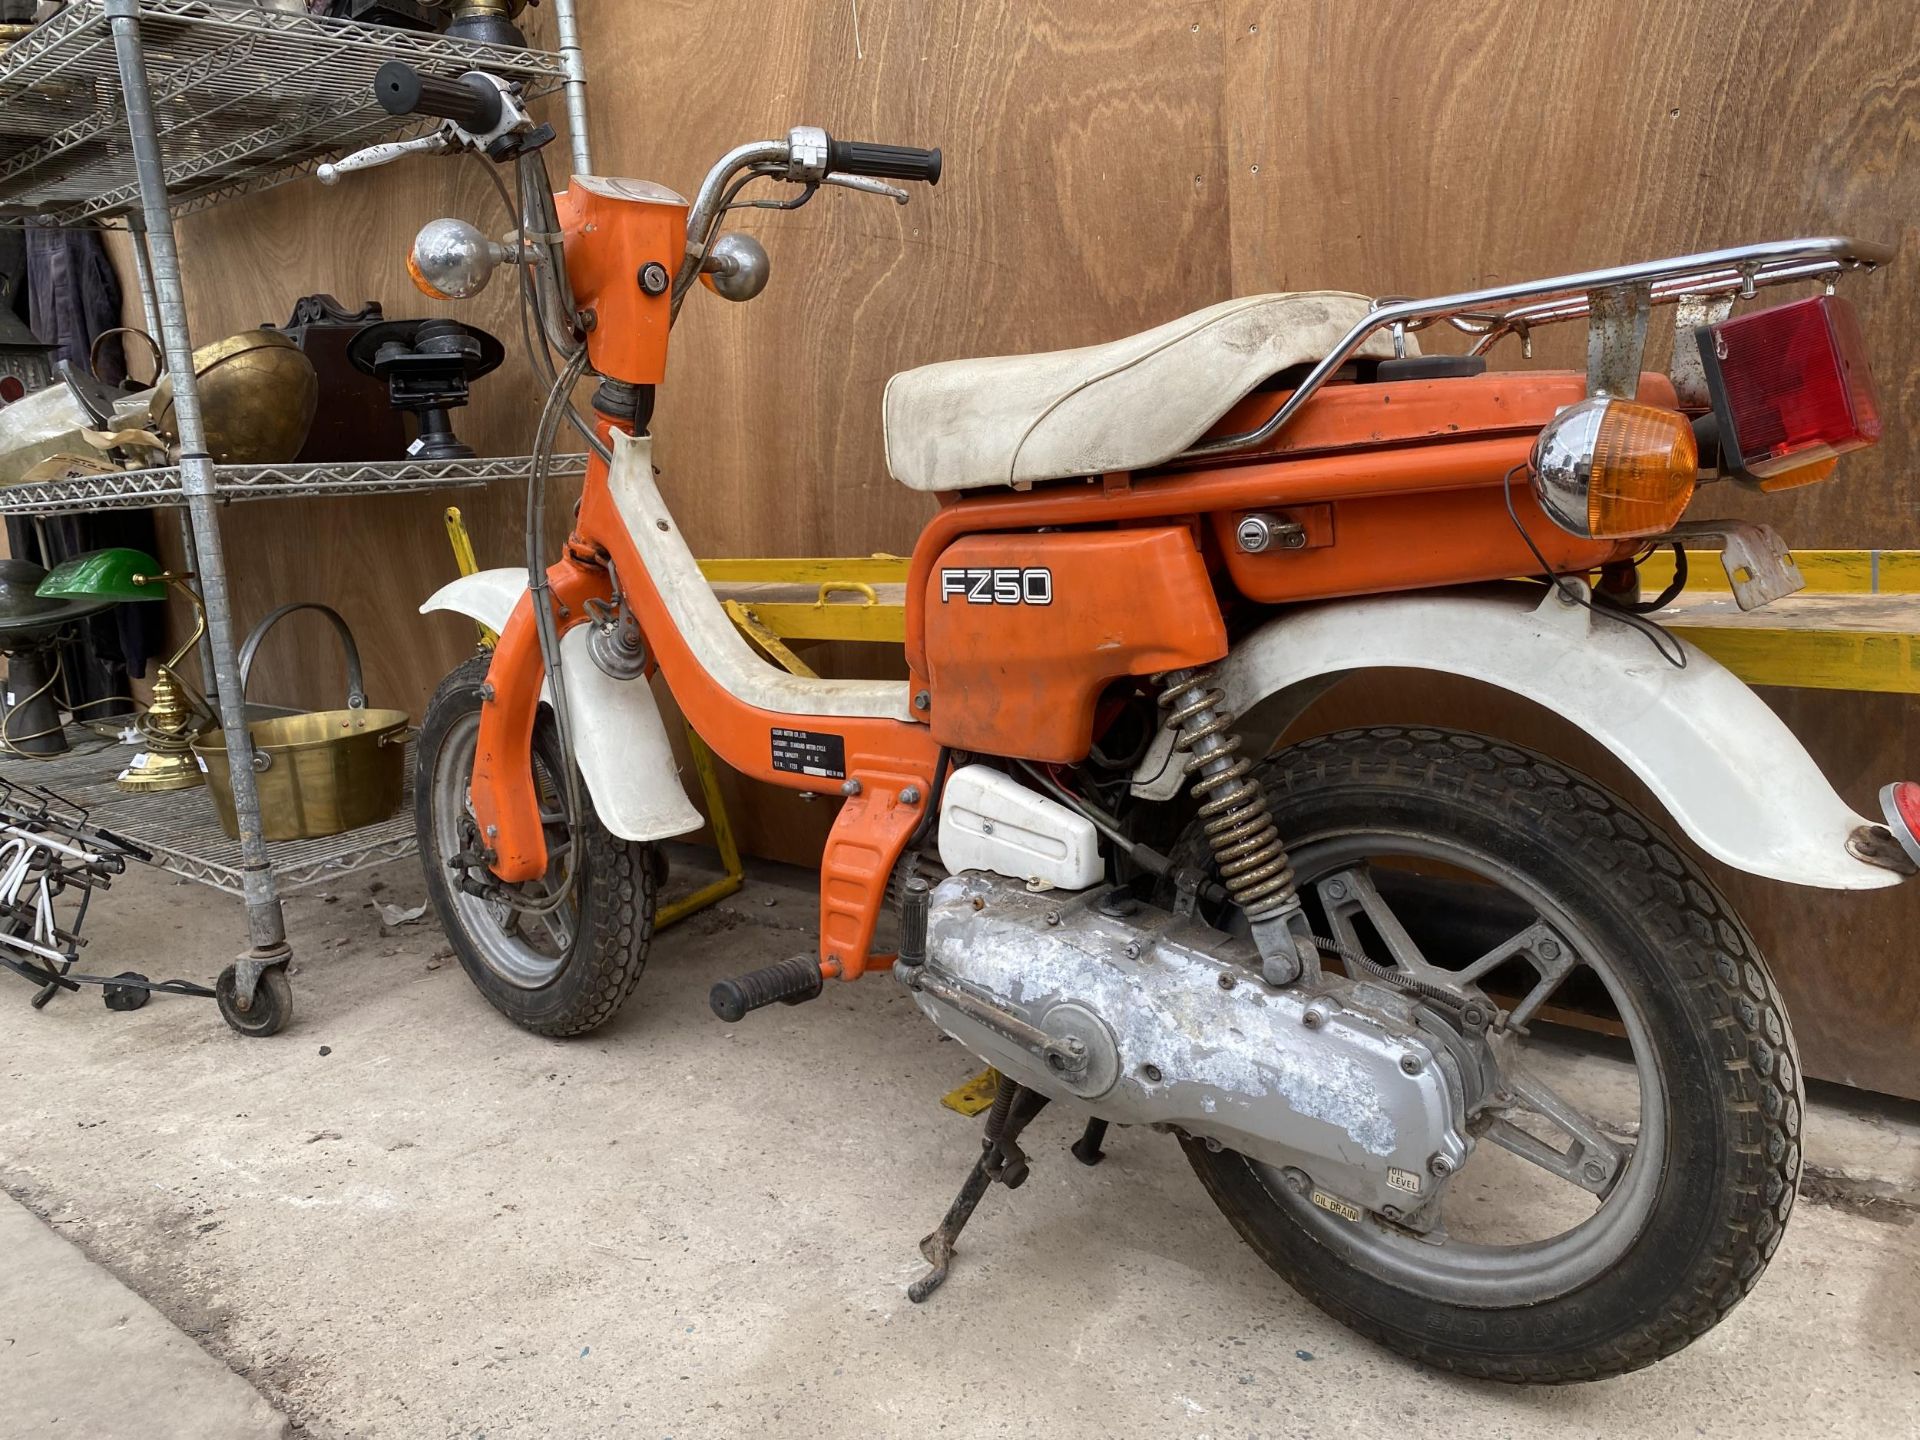 A FZ50 SUZUKI WITH LOG BOOK AND KEY,MILEAGE 611 MILES, REGISTRATION WNA 608X TO INCLUDE A HAND - Image 6 of 15